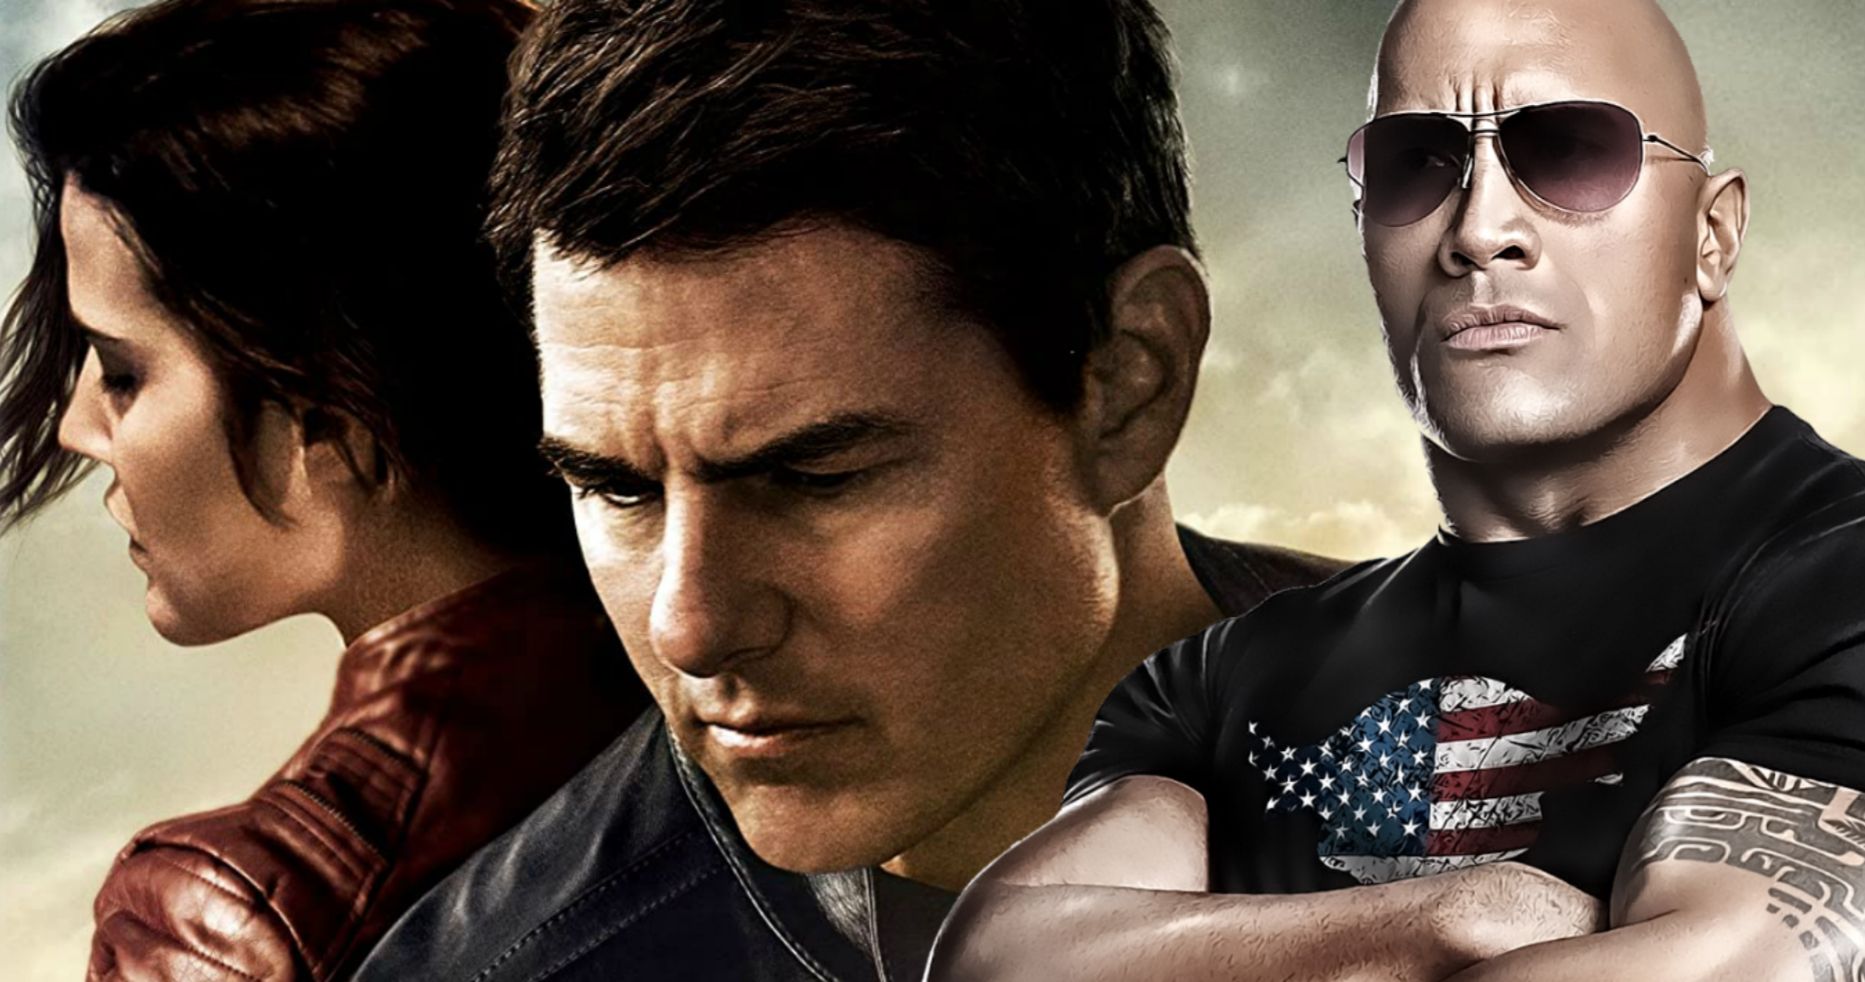 The Rock Still Can't Believe He Lost Jack Reacher Role to Tom Cruise